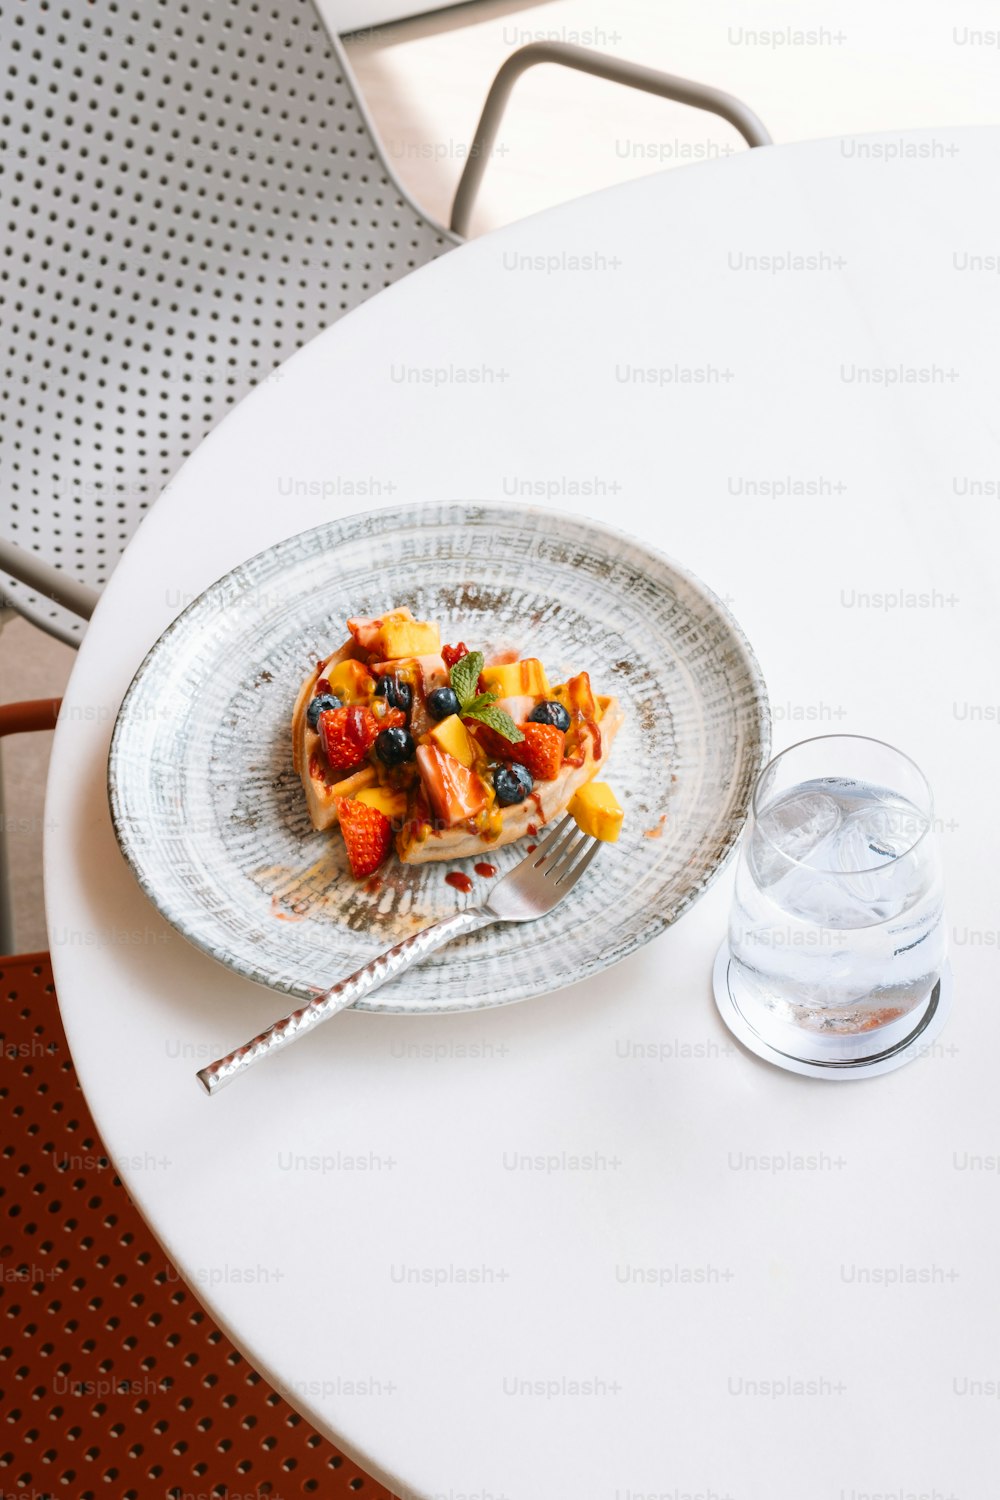 a plate of food on a table with a glass of water